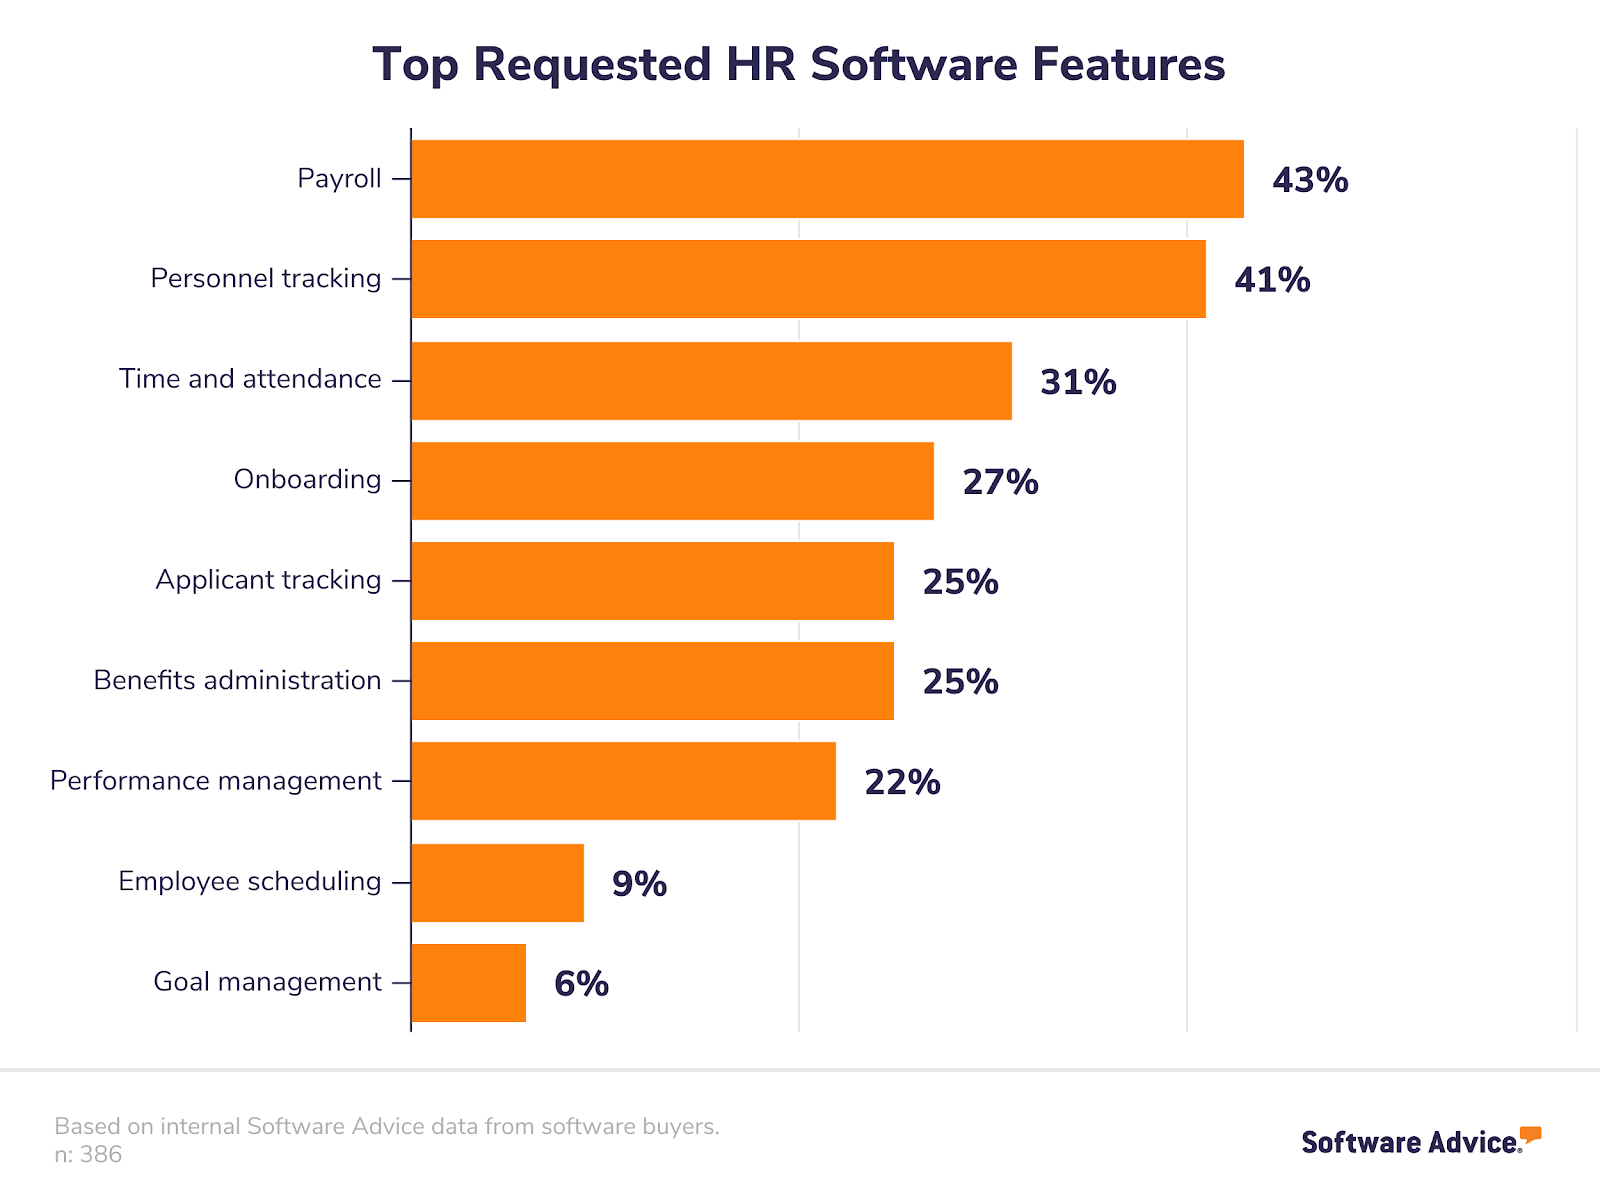 top-requested-hr-software-features-2018